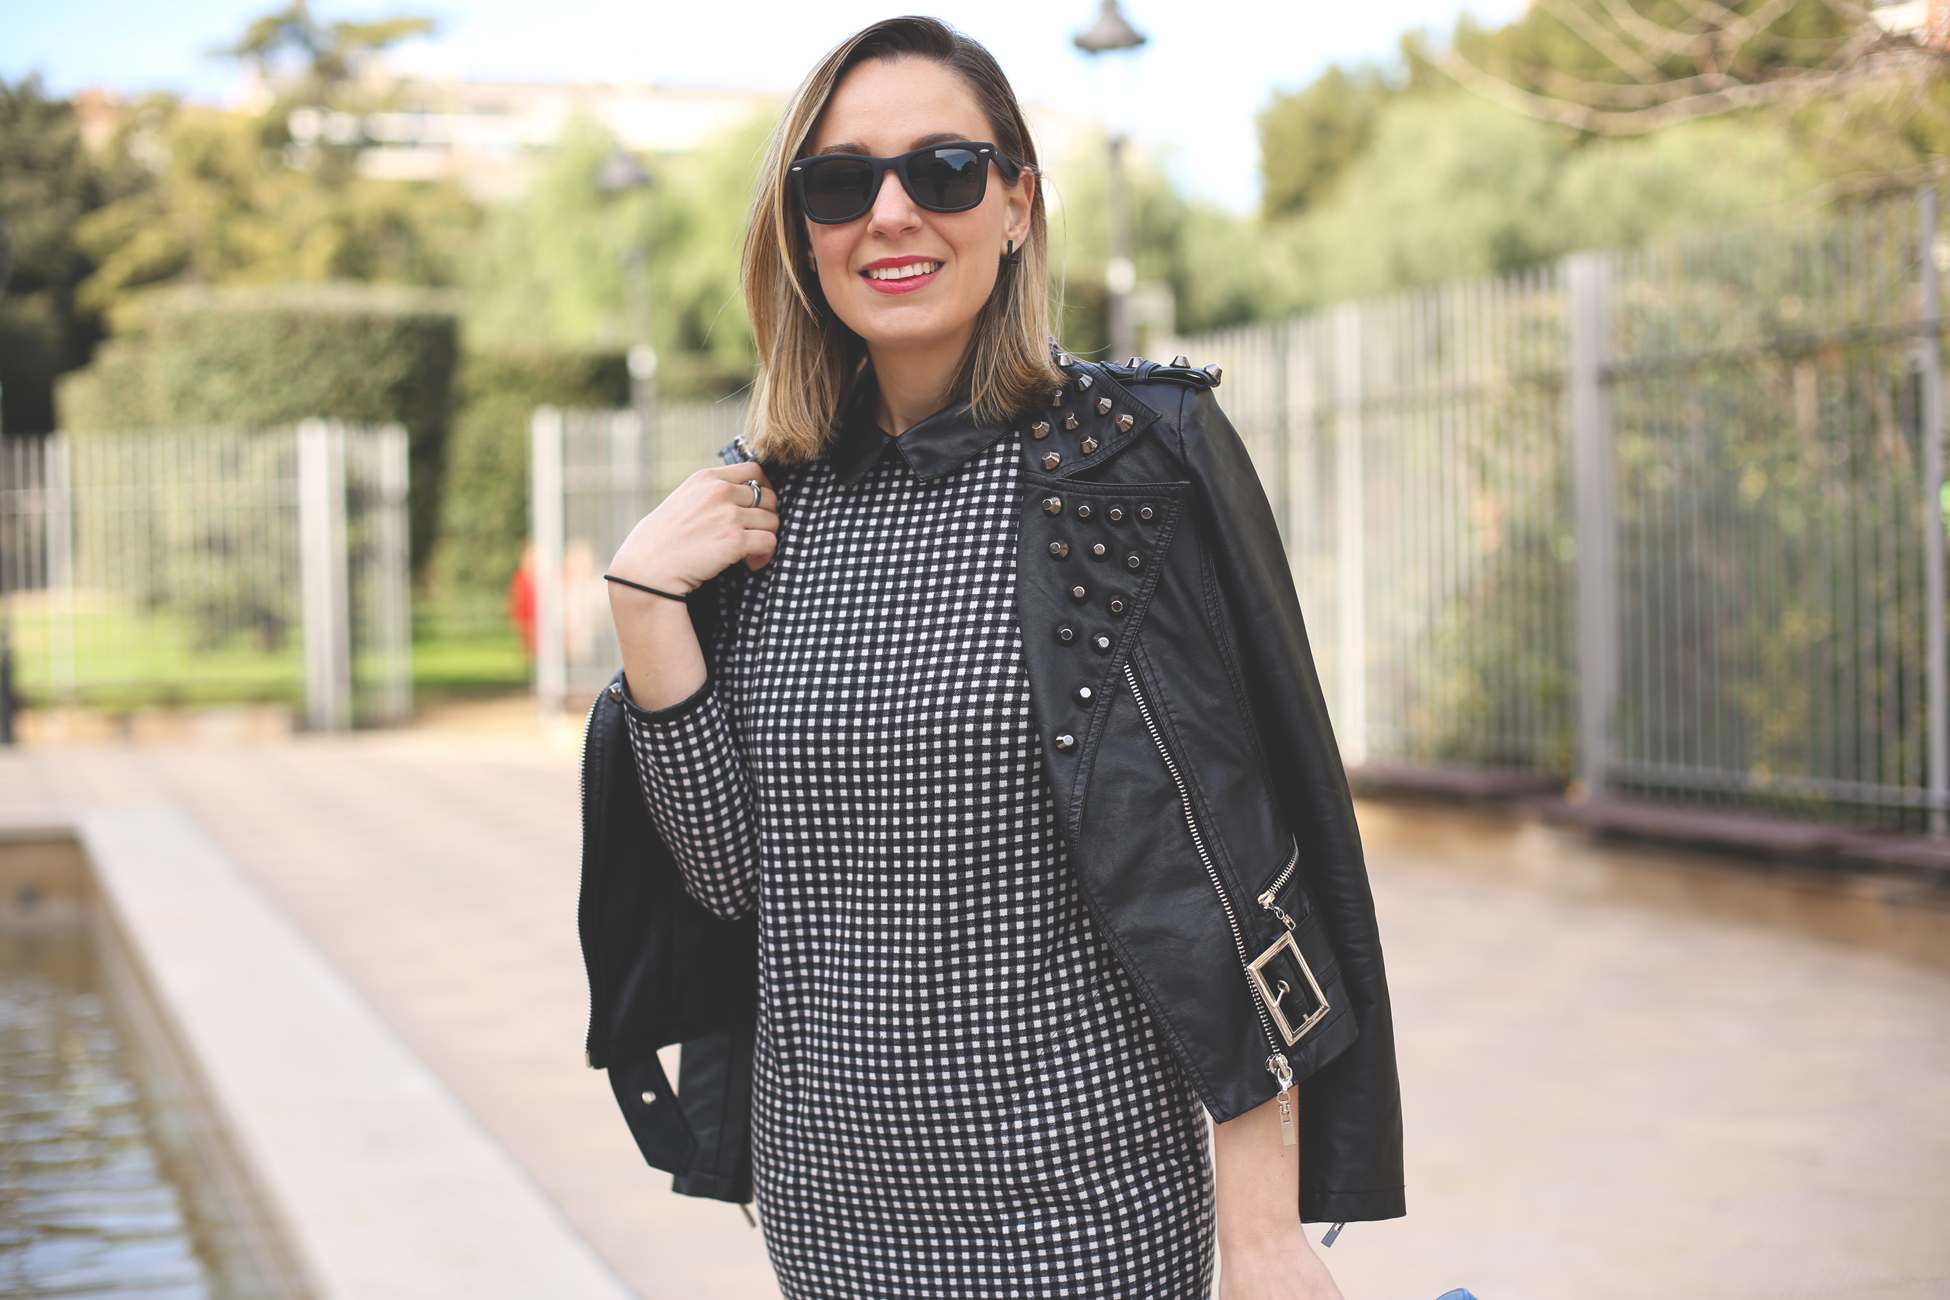 Winter look, black and white, leather, studded jacket, mod style, alexa chung, outfit, fashion blogger, red lips, klein, 